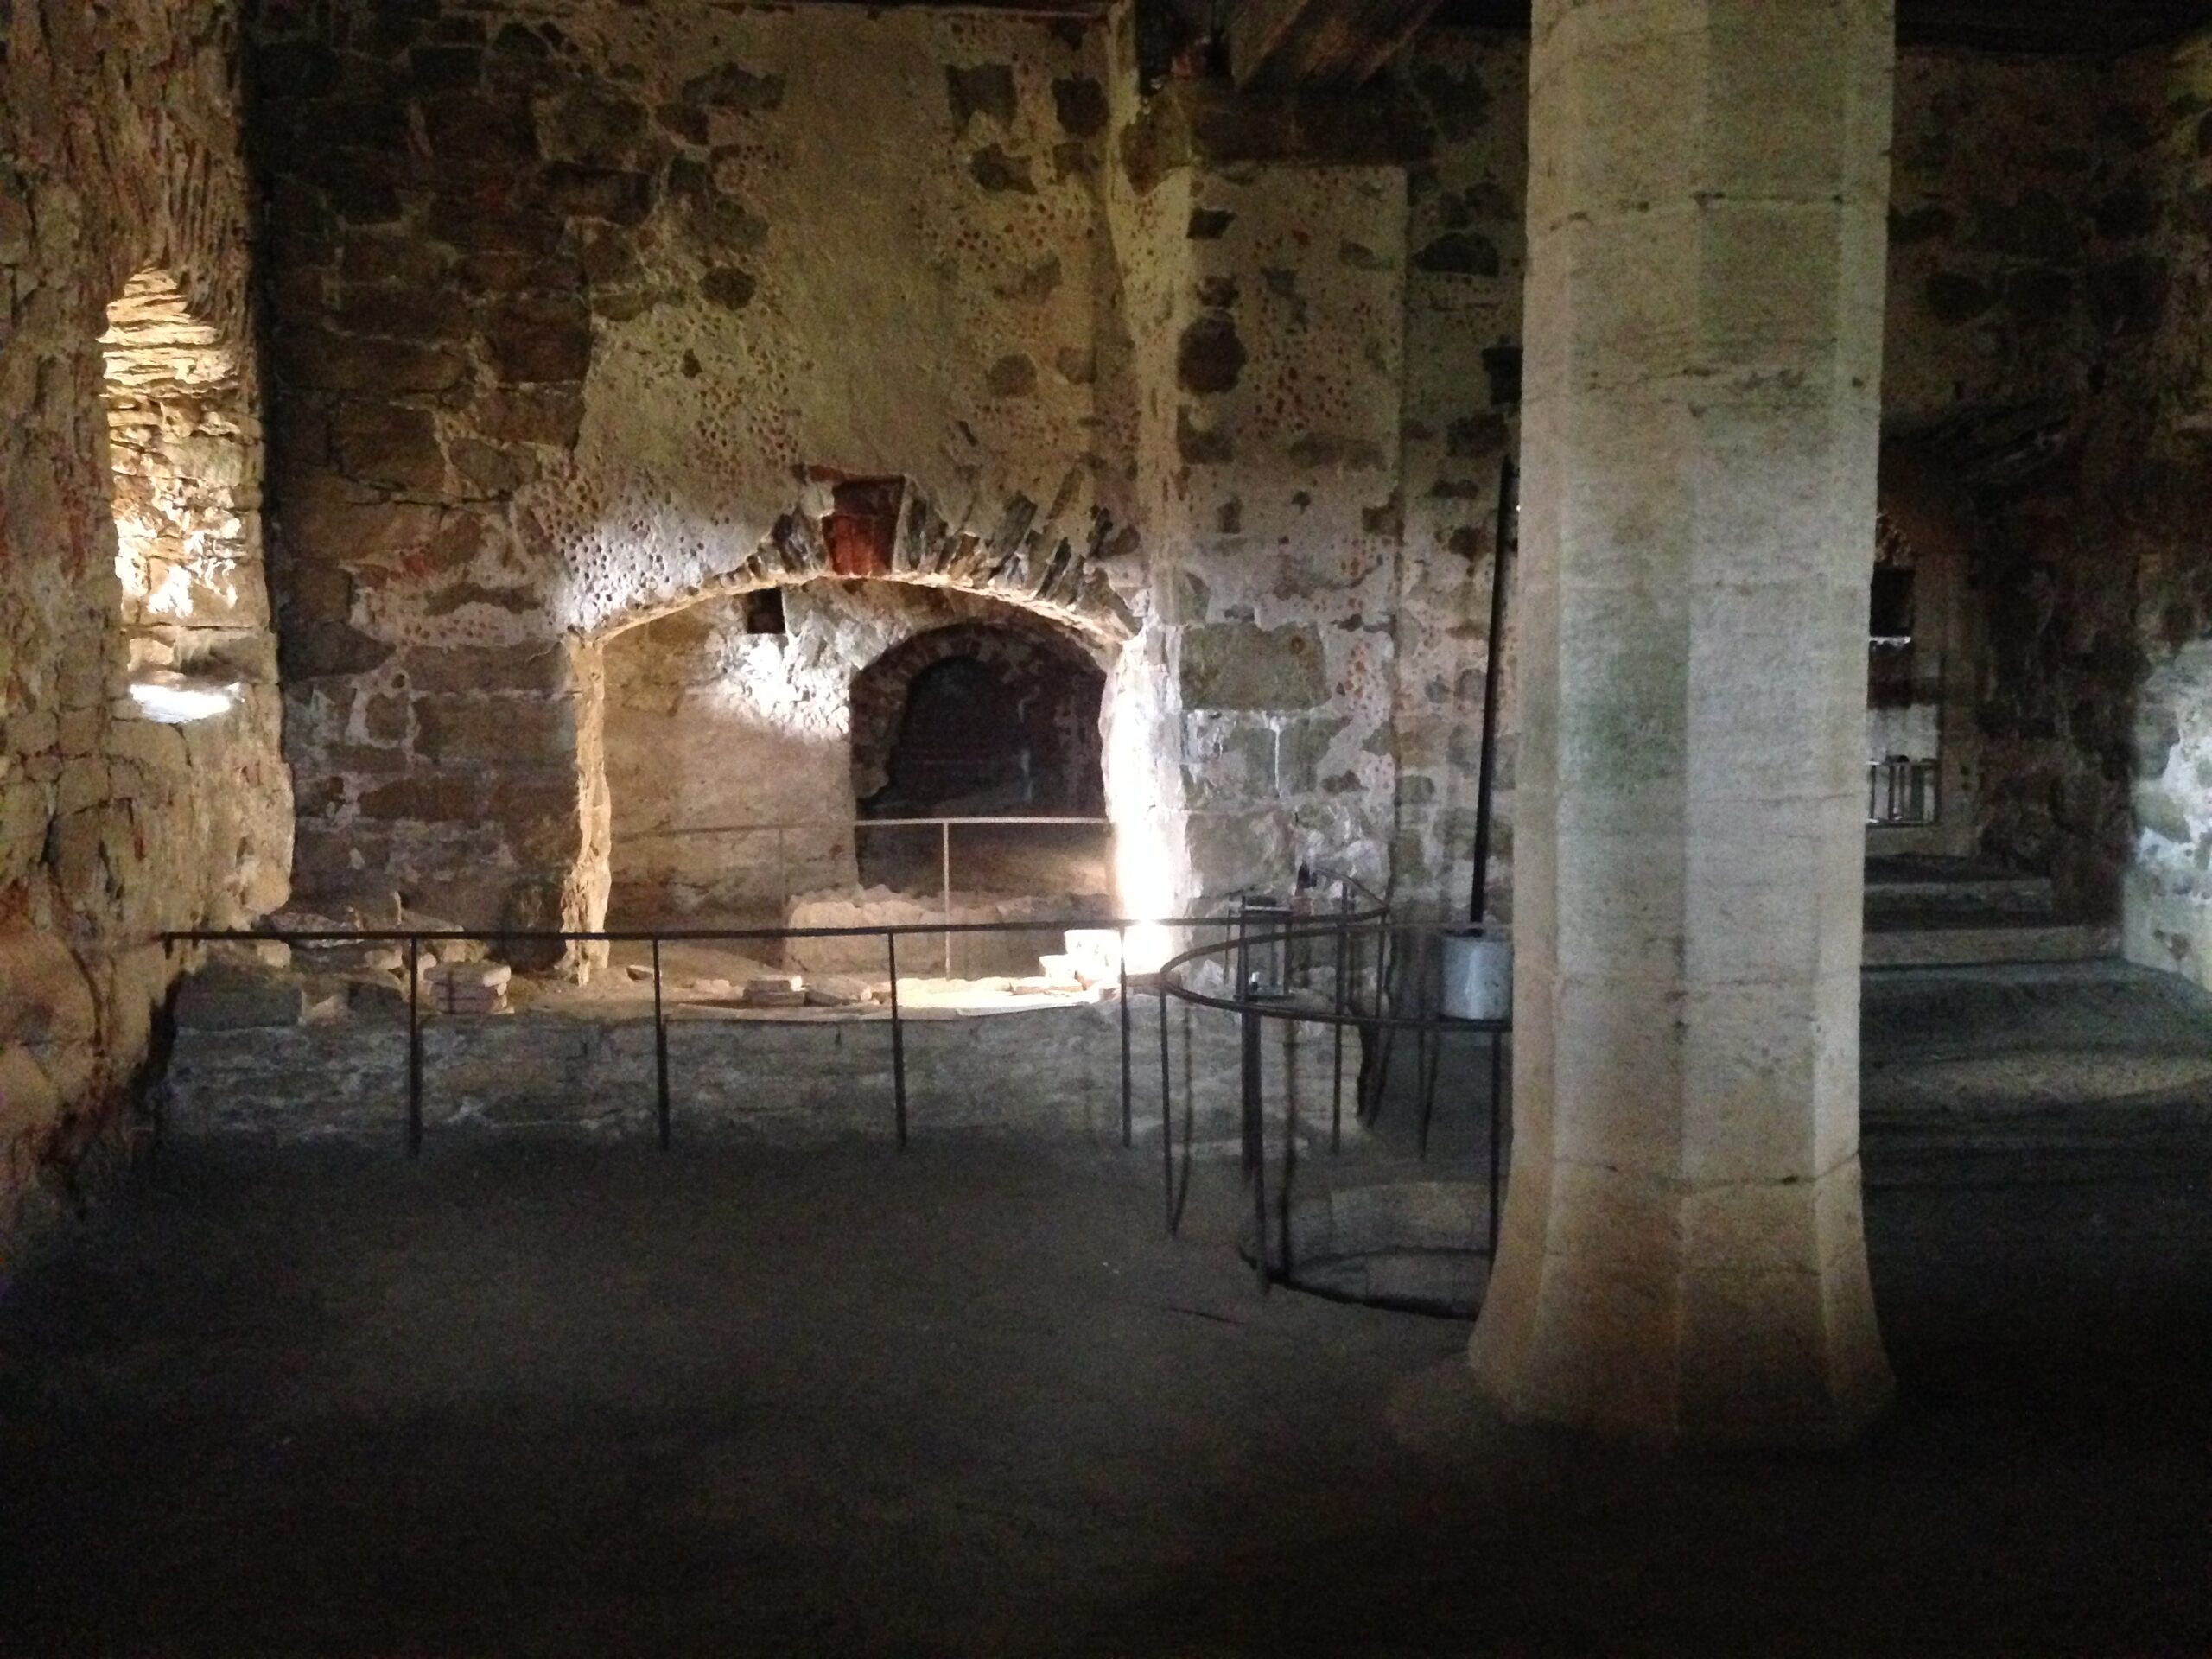 Here you can see the kitchen cellar with pillars on the right and the kitchen space in the middle.